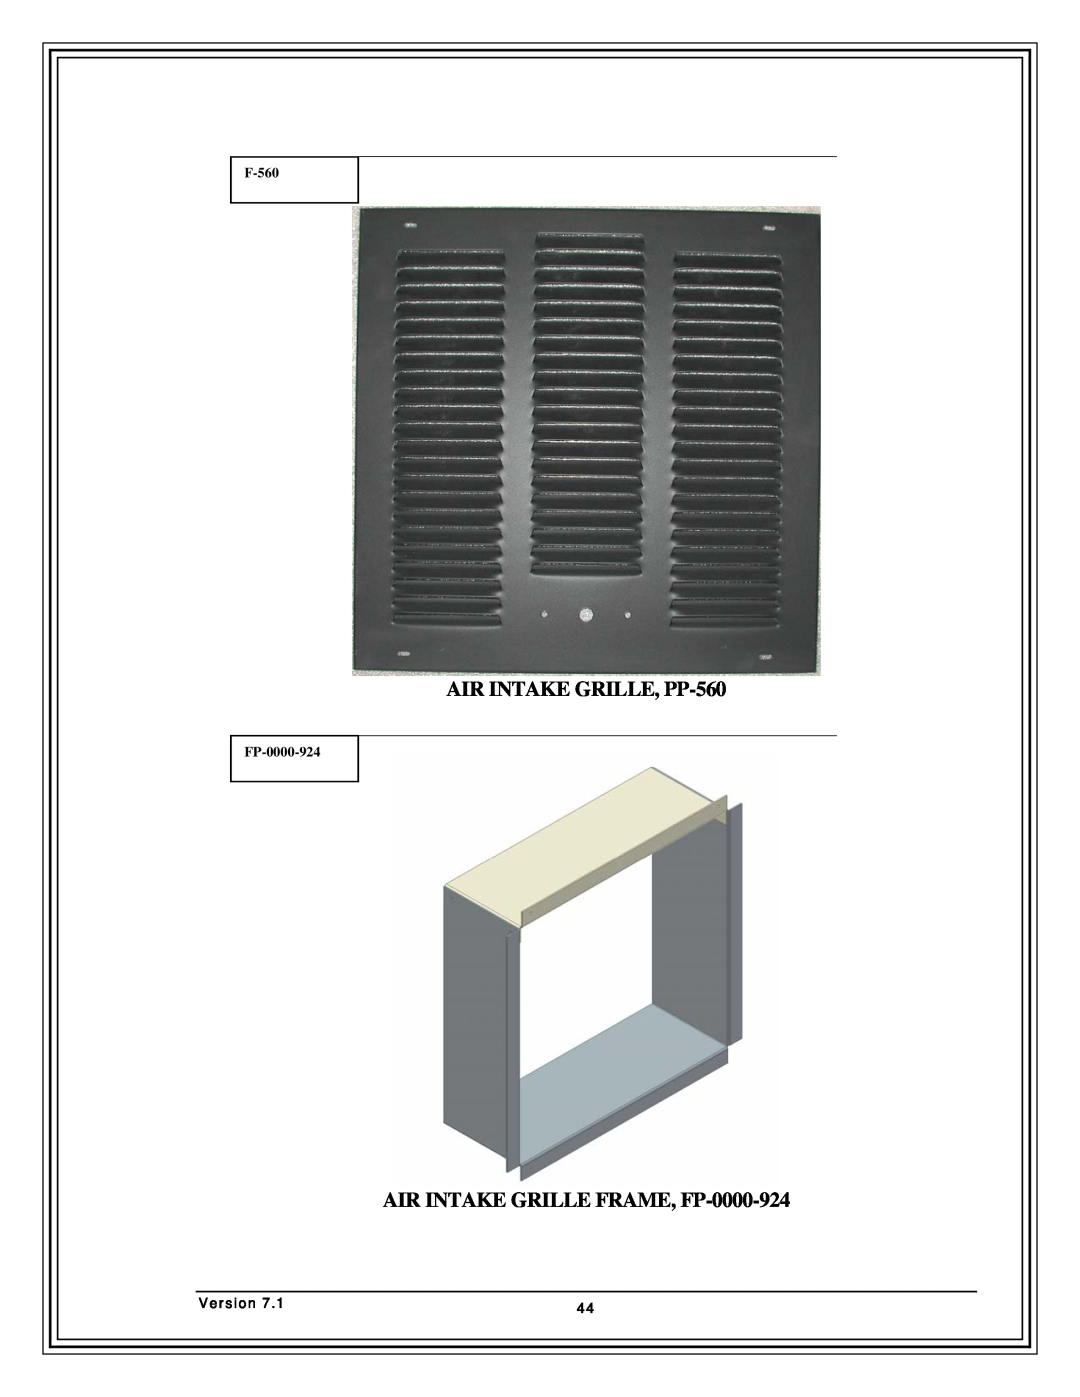 Country Flame FP37, FP42, Fireplace FP33 AIR INTAKE GRILLE, PP-560, AIR INTAKE GRILLE FRAME, FP-0000-924, F-560, Version 